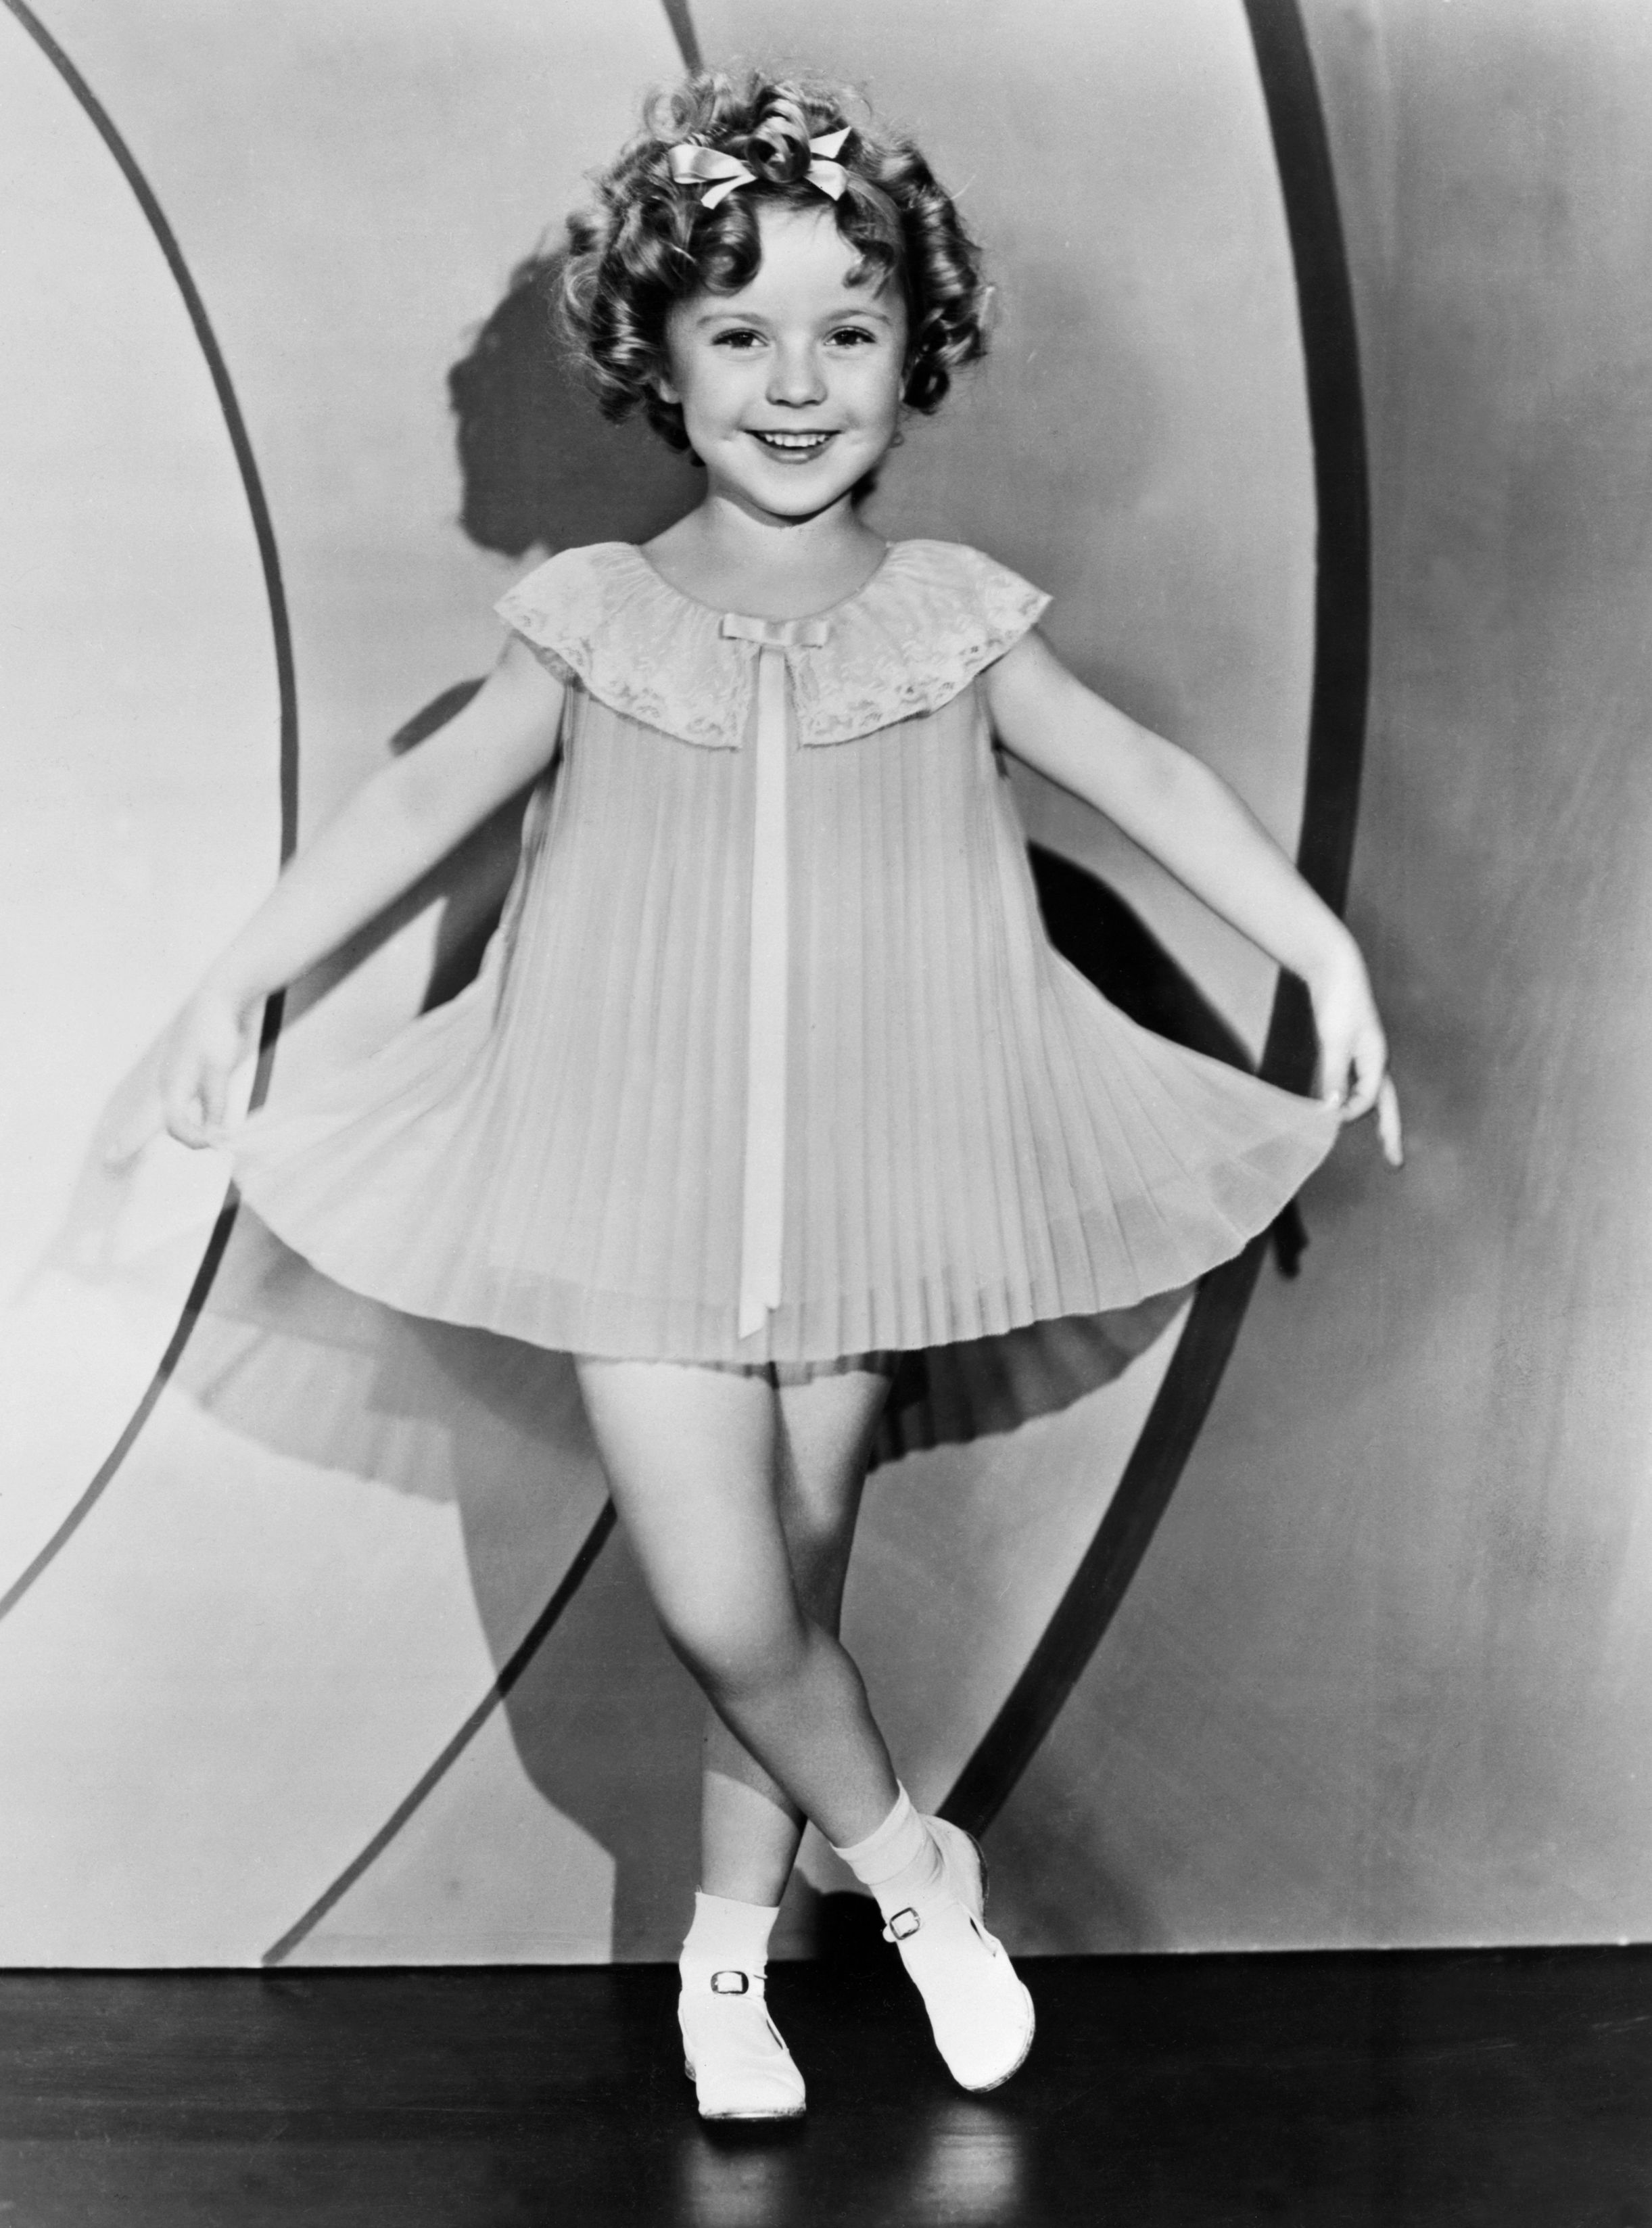 Anna Lou Vintage Pregnant - The Biggest Child Star the Year You Were Born